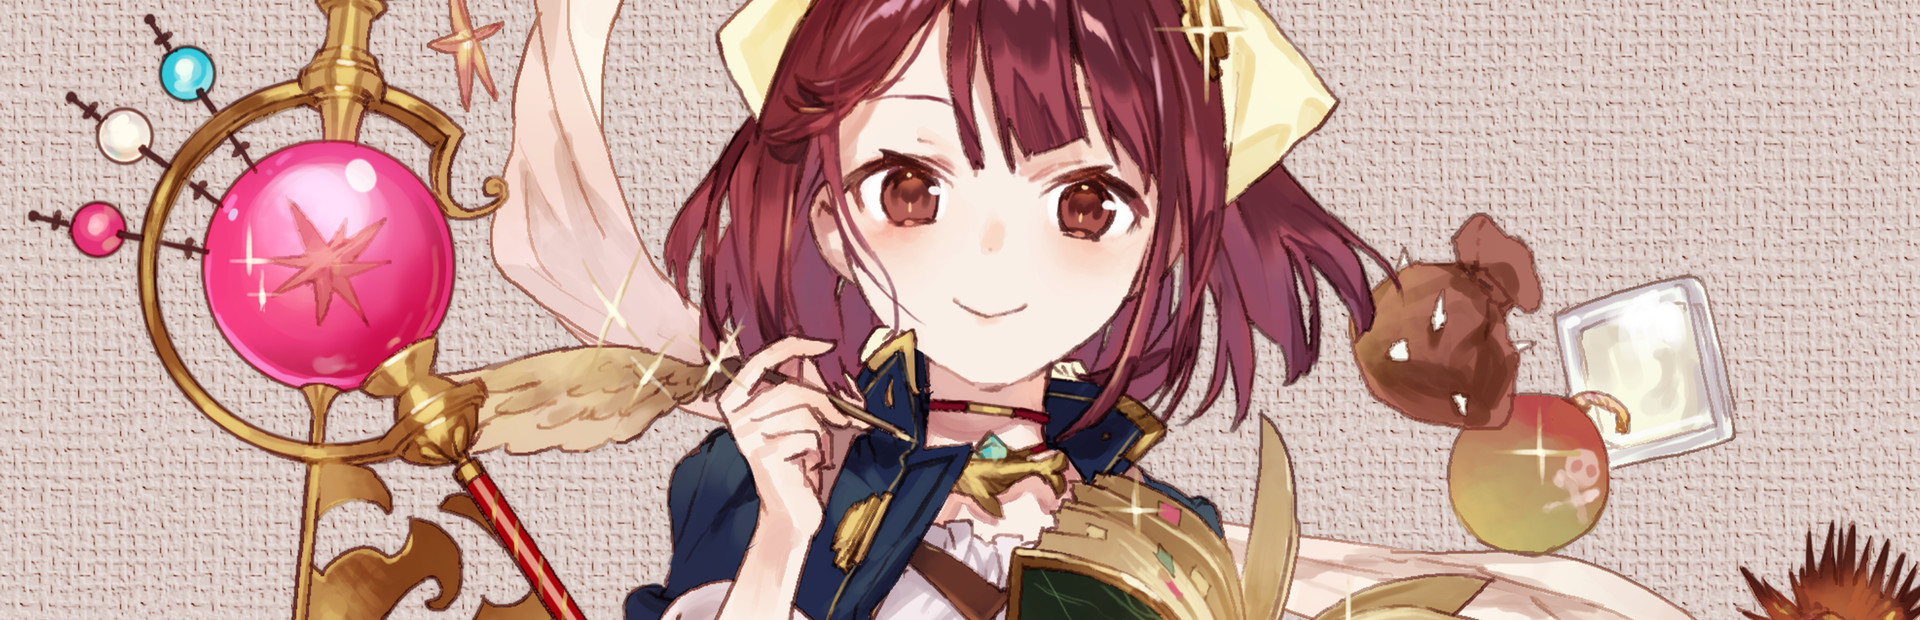 Atelier Sophie: The Alchemist of the Mysterious Book DX cover image